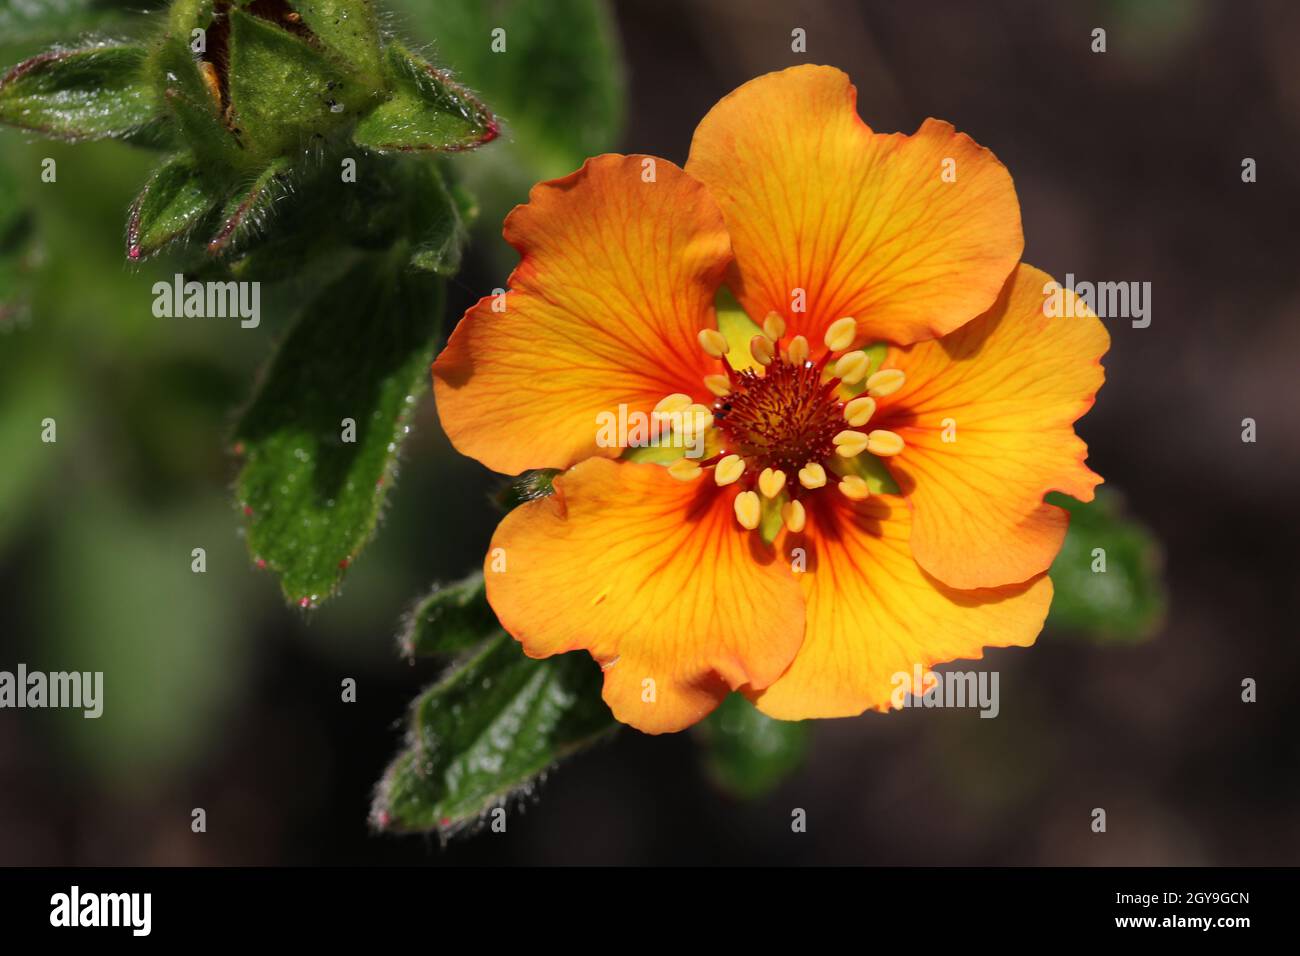 Orange cinquefoil, Potentilla megalantha variety Majlands, flower in close up with a dark background of blurred leaves. Stock Photo